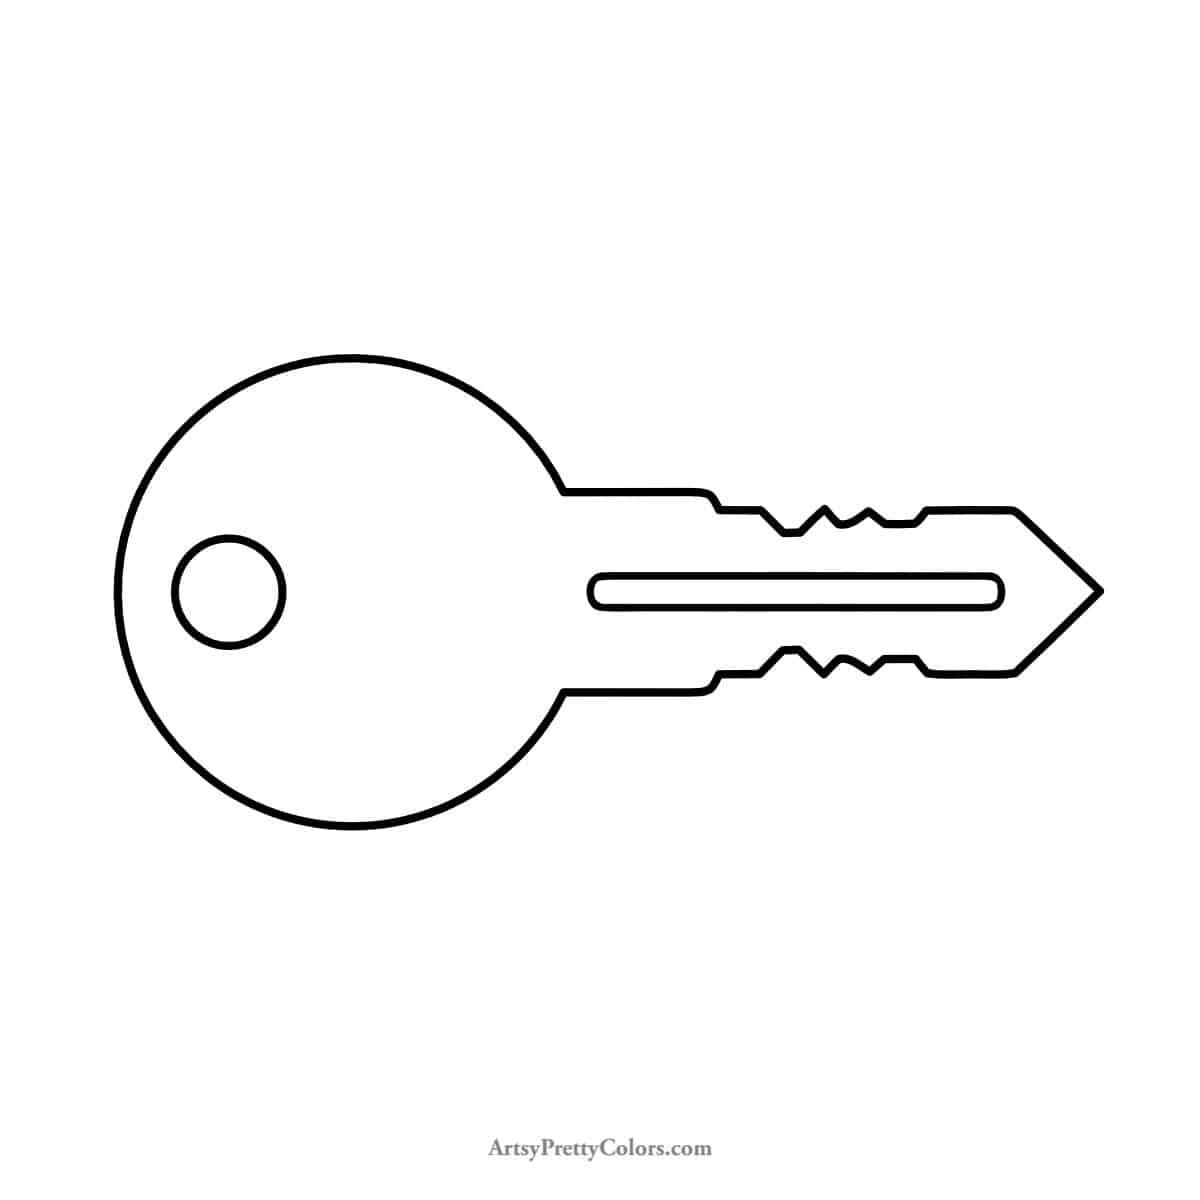 final line drawing for how to draw a key